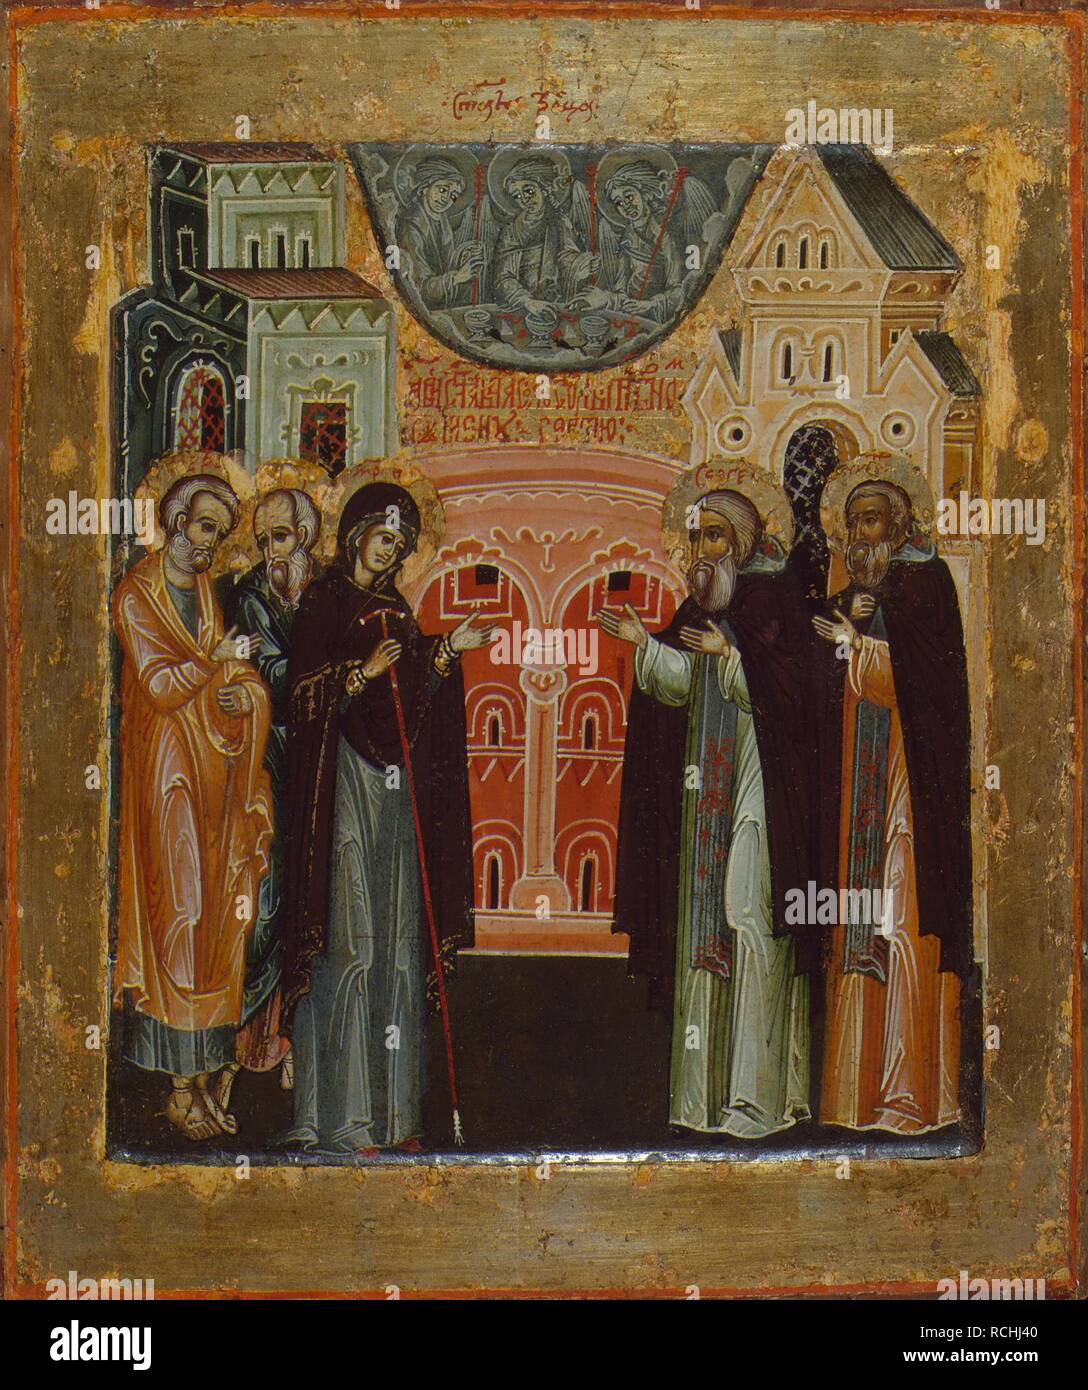 The Apparition of Our Lady to Saint Sergius of Radonezh. Museum: State Hermitage, St. Petersburg. Author: Russian icon. Stock Photo